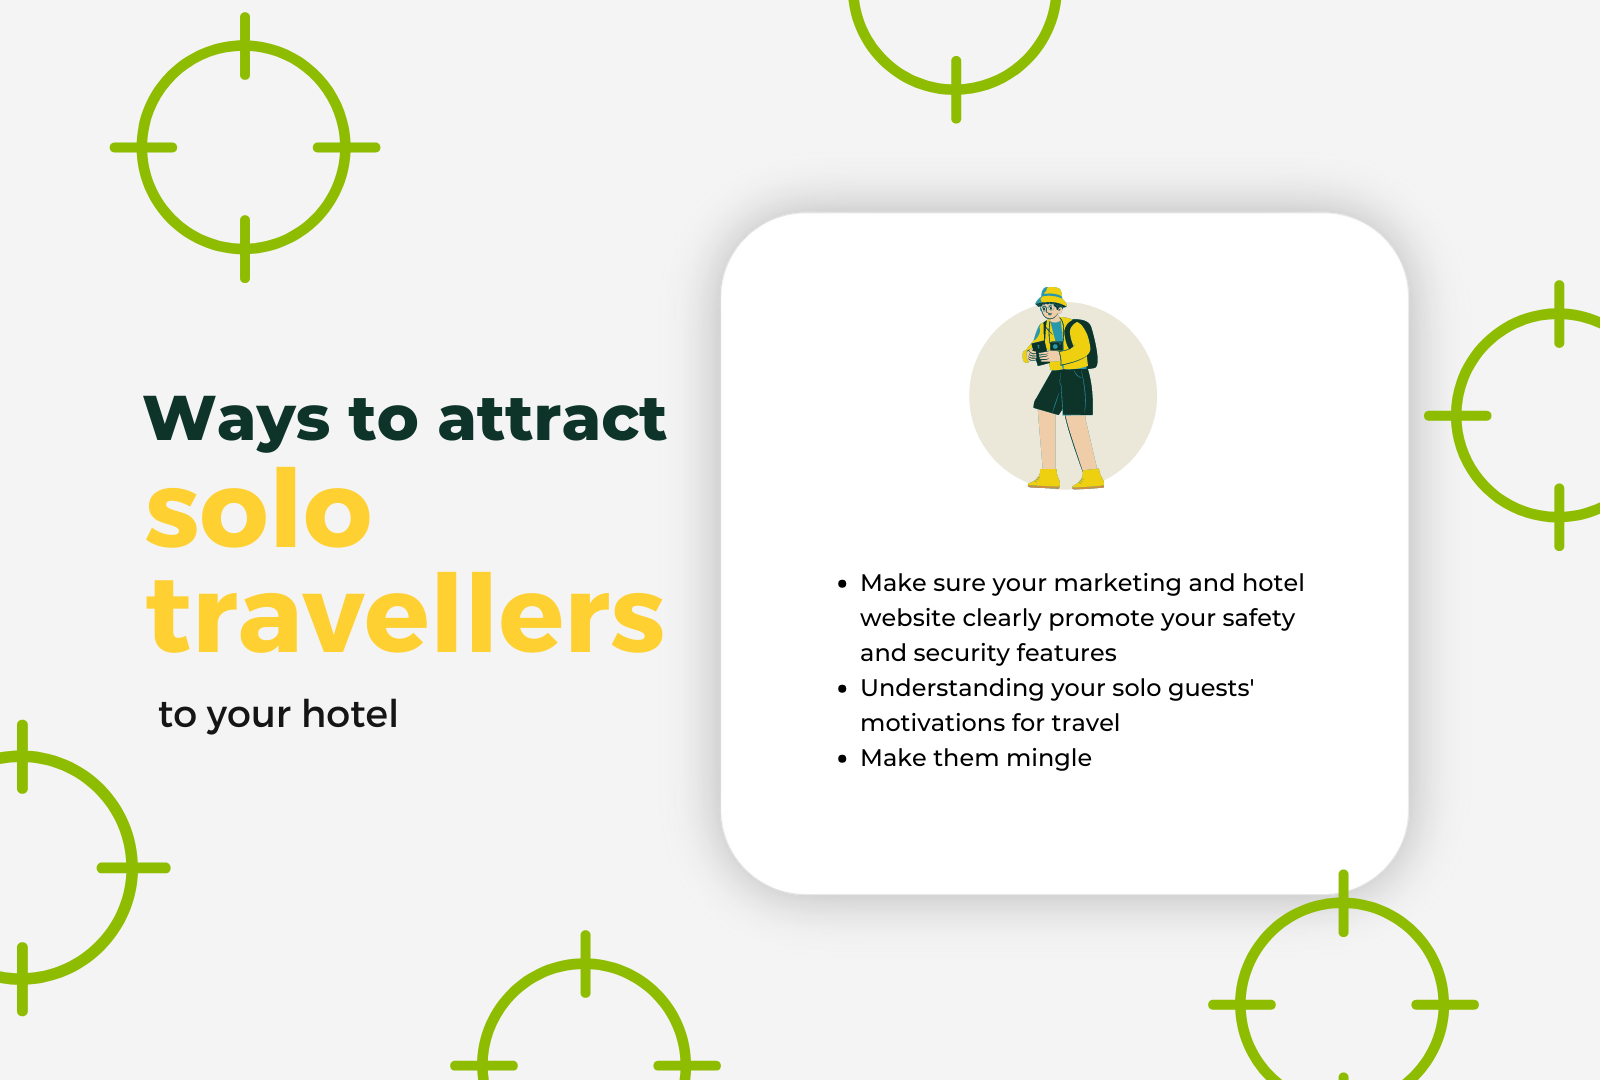 Target Market of Solo Travellers